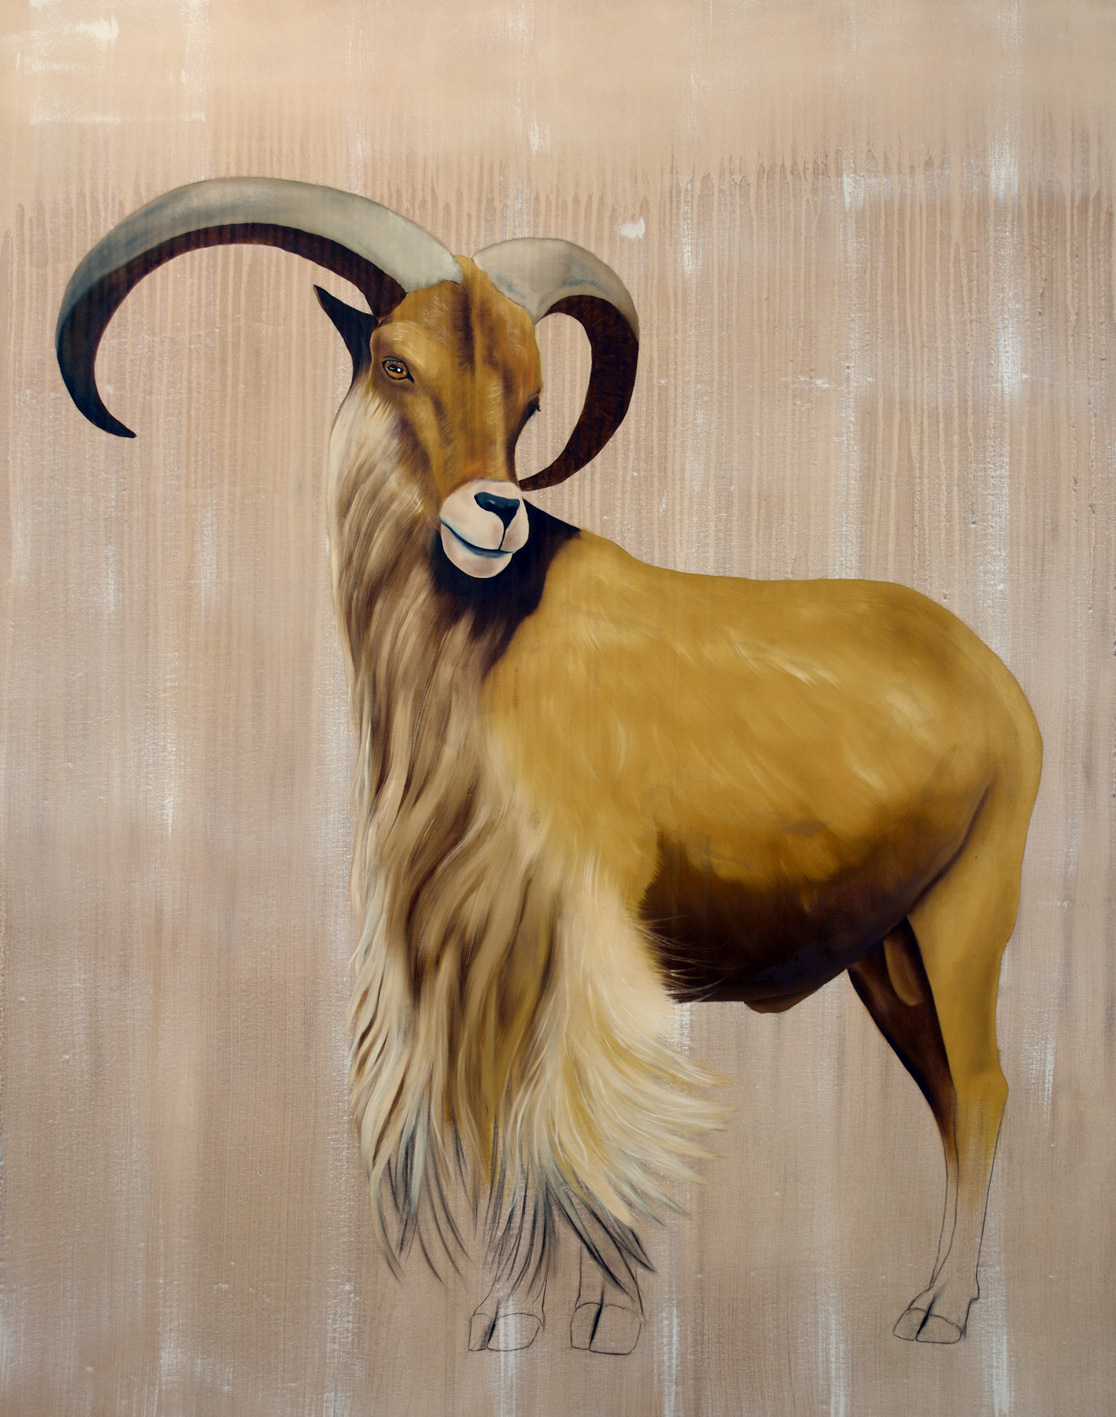 AMMOTRAGUS LERVIA barbary-sheep-goat-ammotragus-lervia Thierry Bisch Contemporary painter animals painting art decoration nature biodiversity conservation